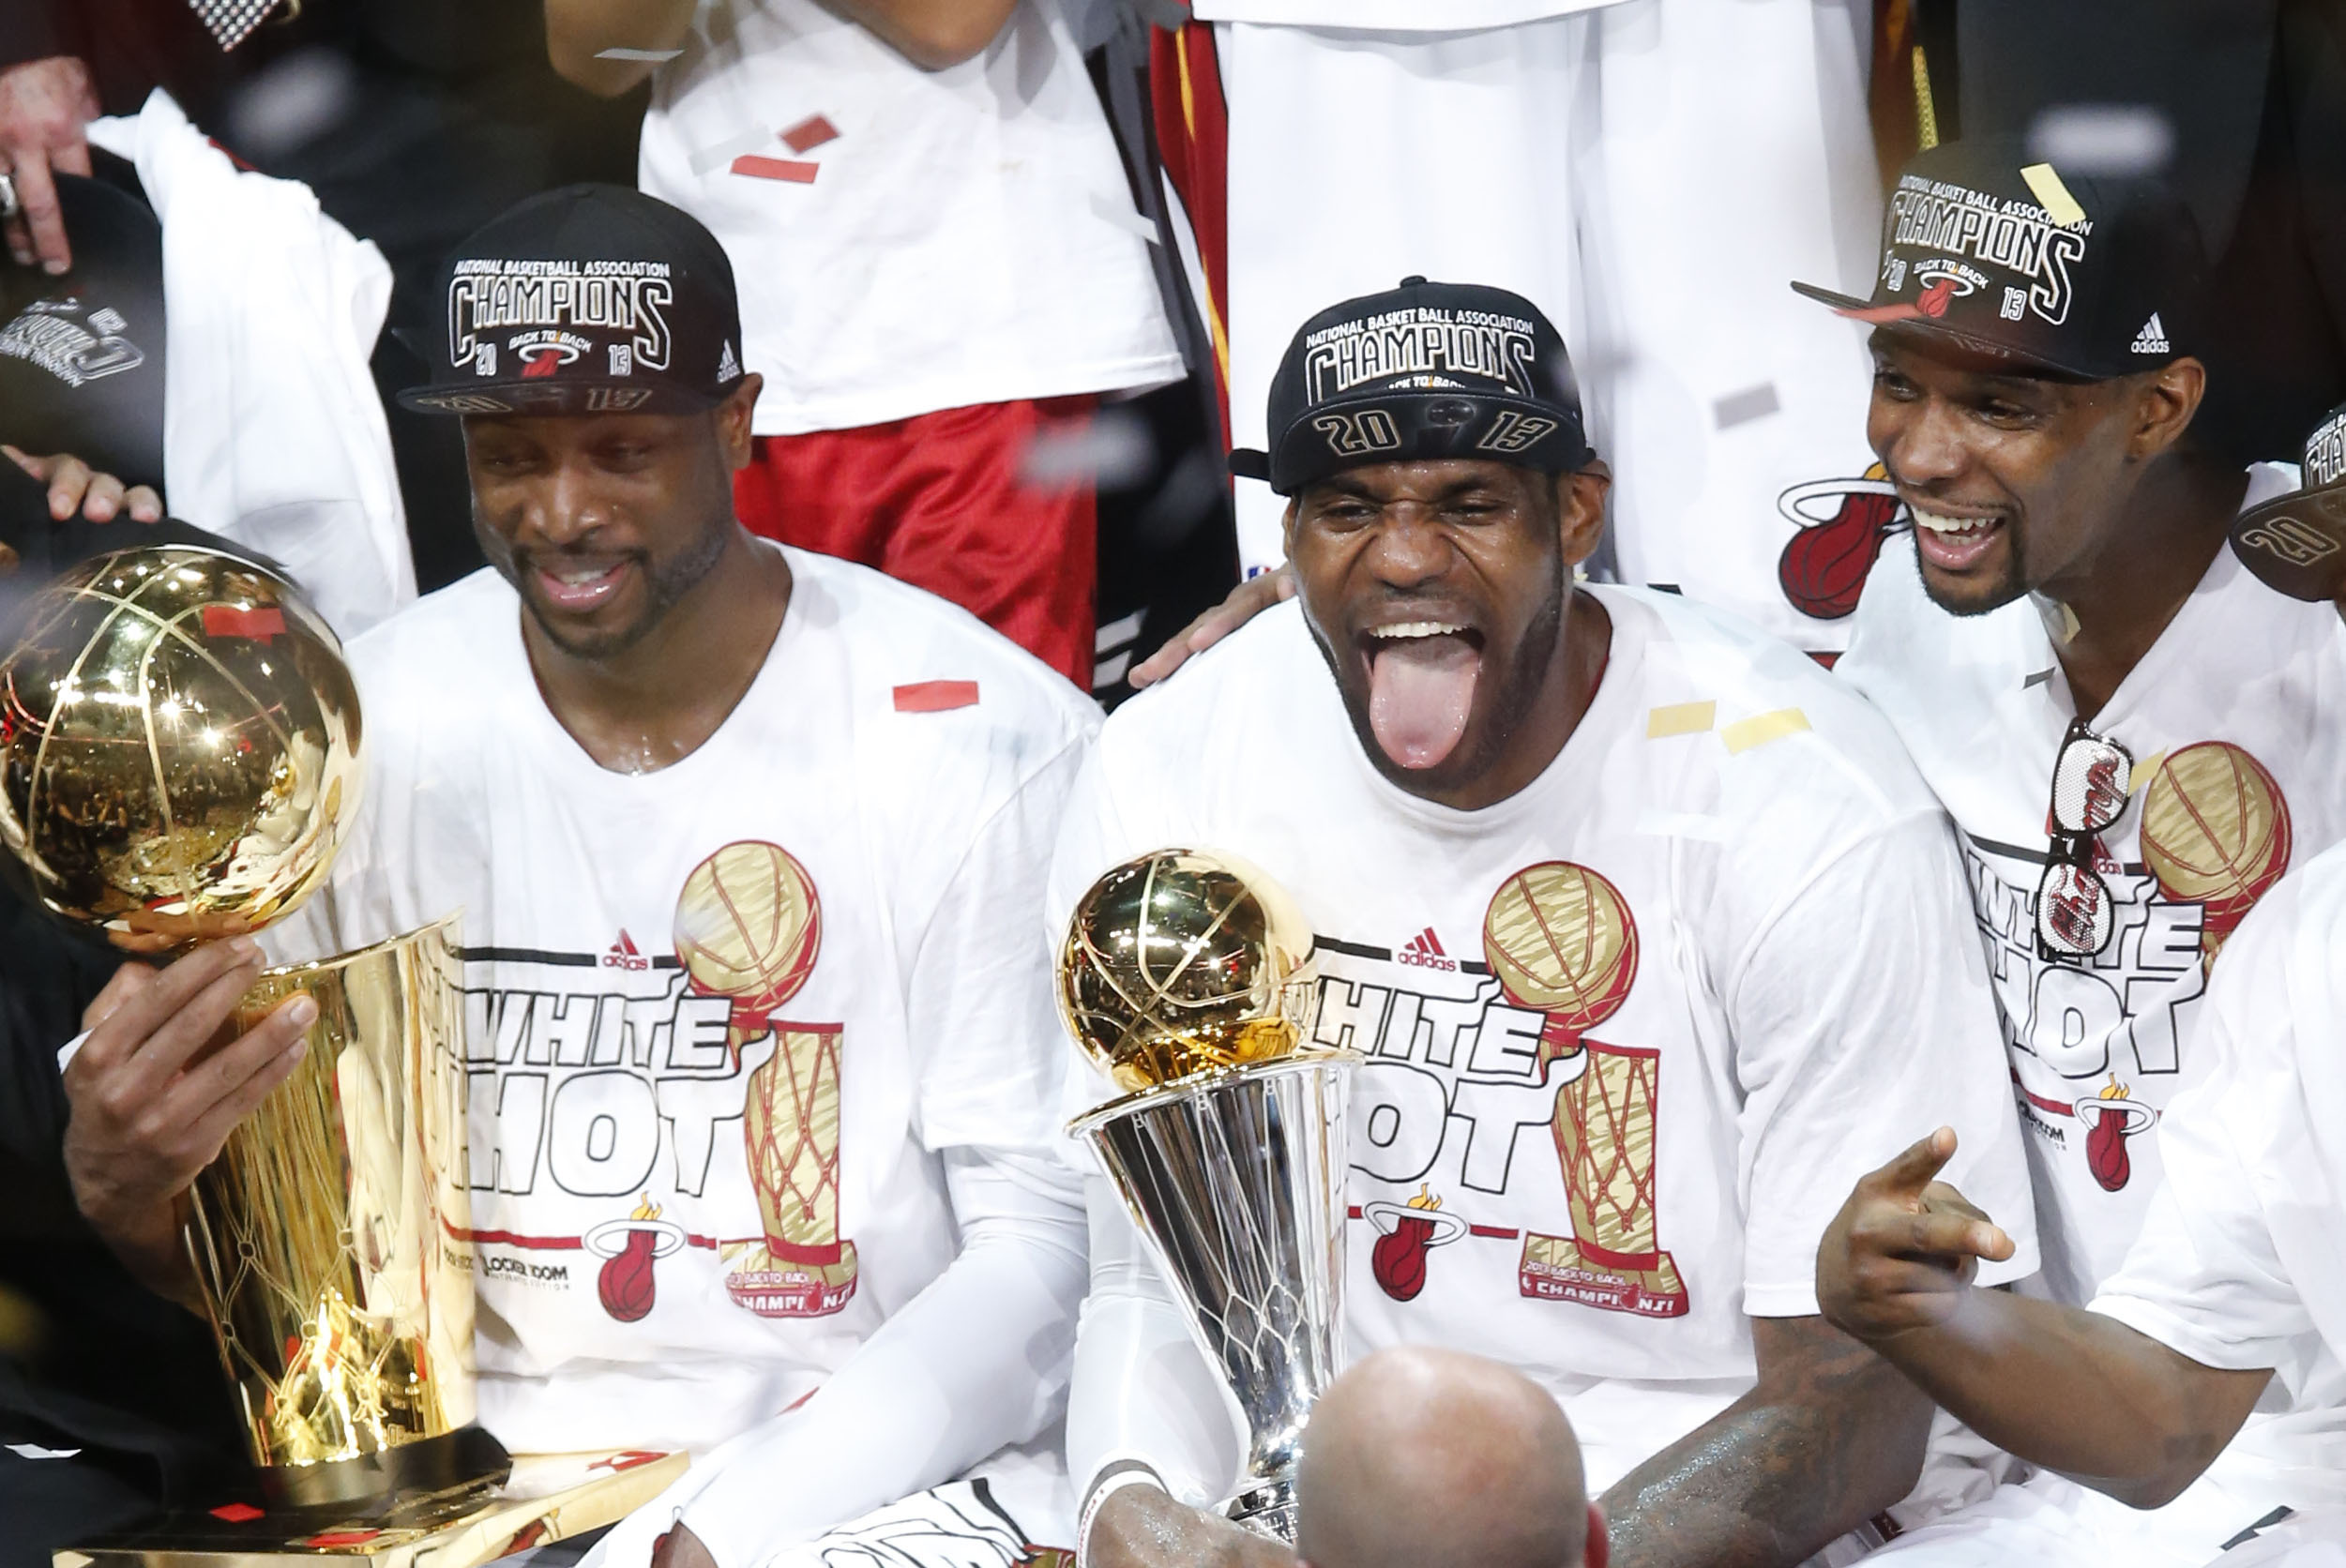 Miami Heat's LeBron James finally puts to rest talk of him not